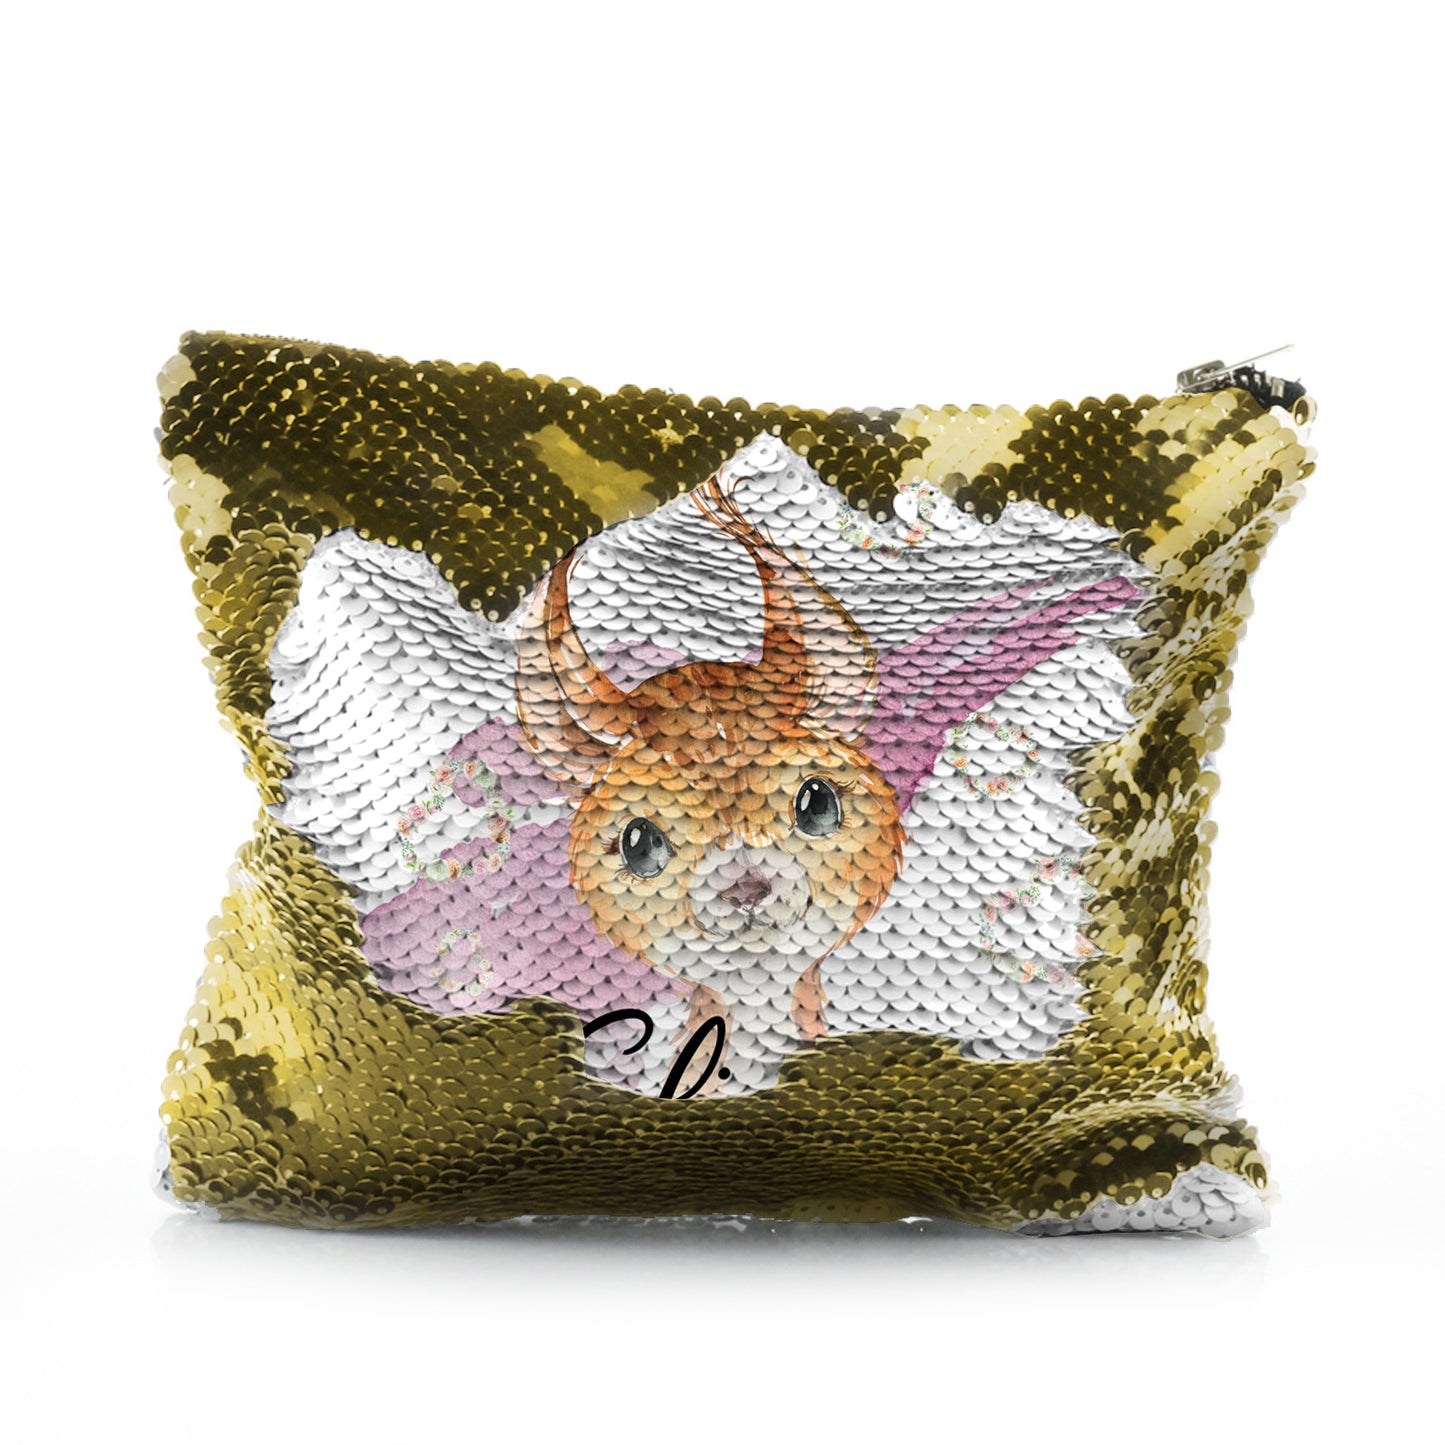 Personalised Sequin Zip Bag with Red squirrel Heart Wreaths and Cute Text